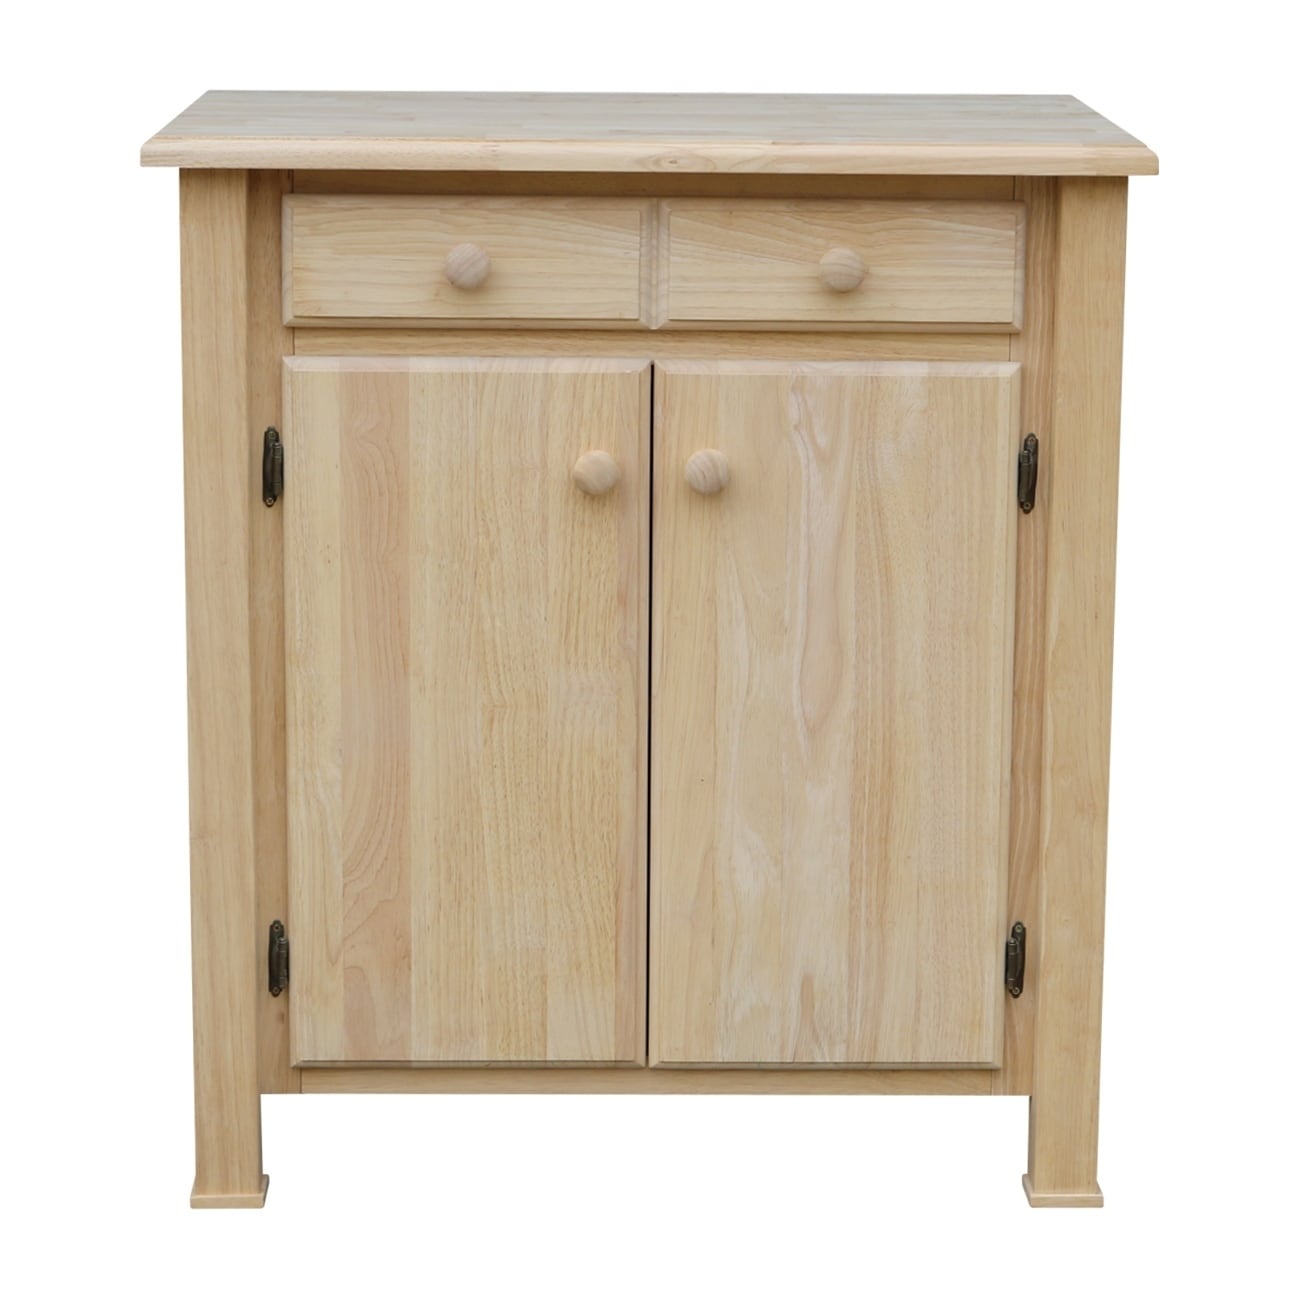 Shop Copper Grove Lew Unfinished Kitchen Island And Work Center